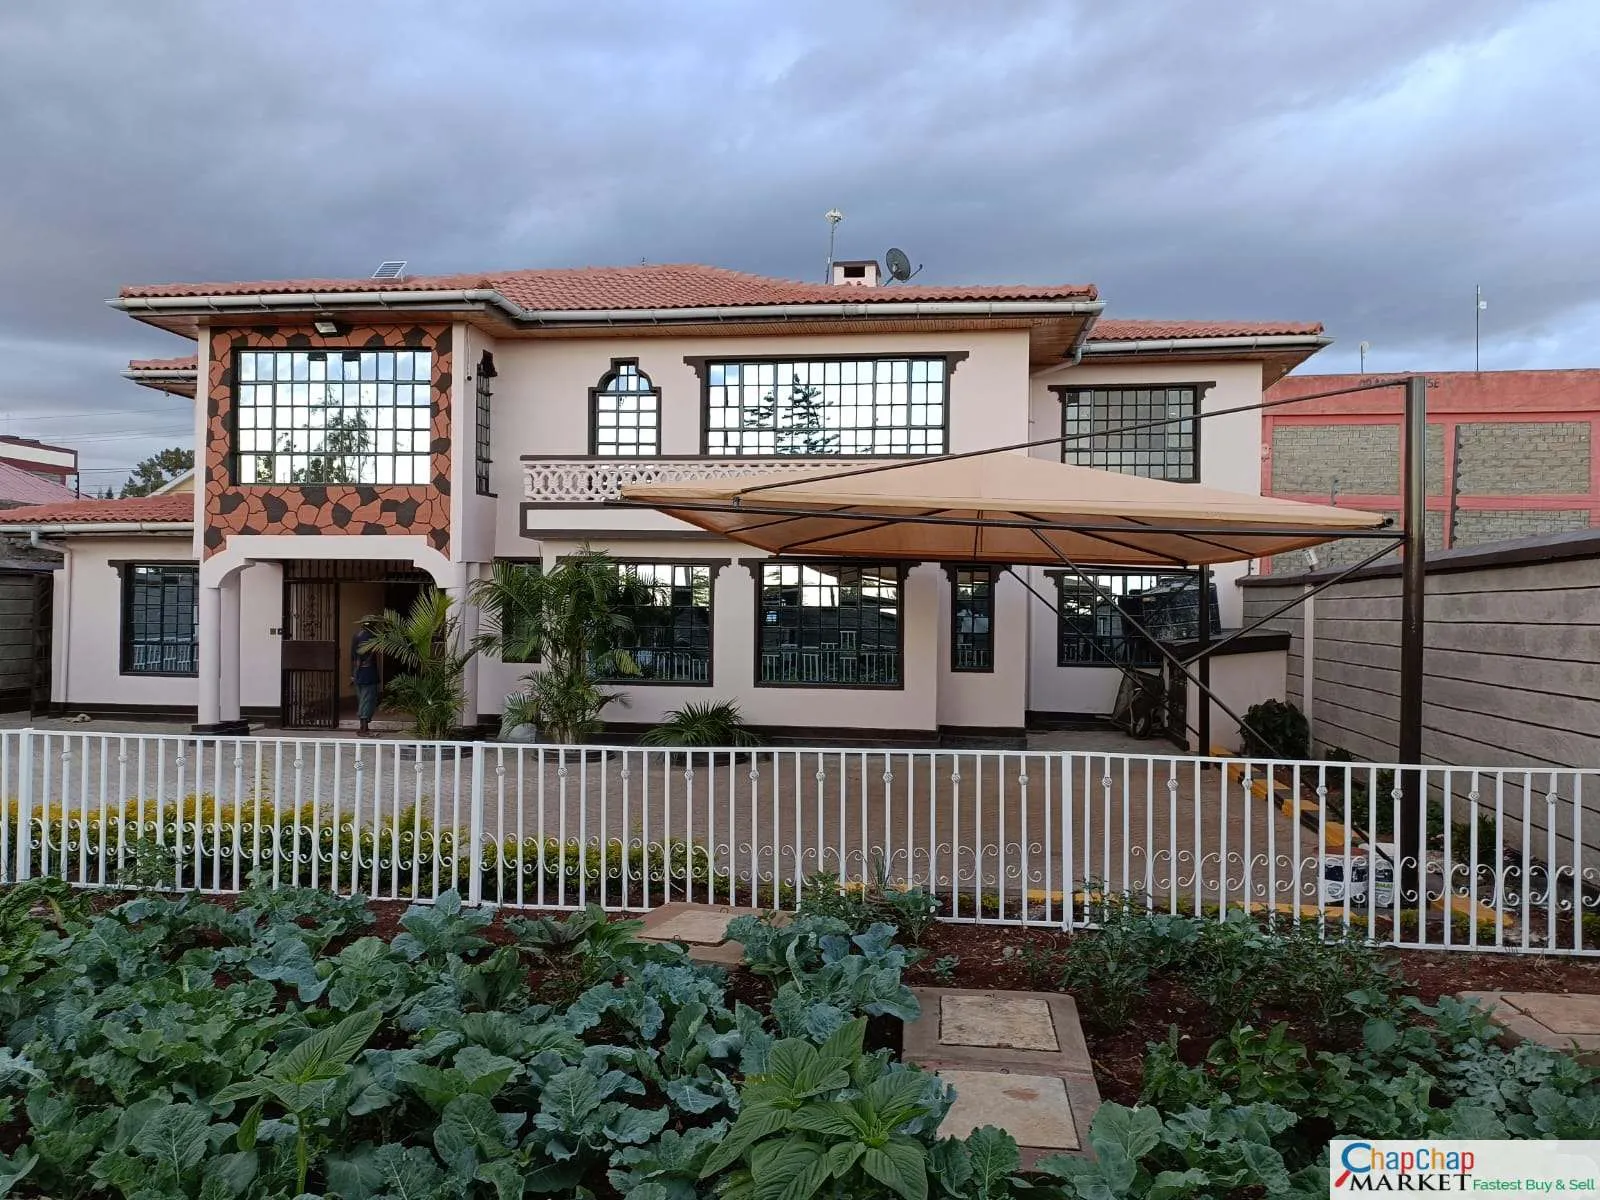 House/Apartment For Sale Real Estate-5 bedroom all ensuite Mansion for sale in Acacia kitengela with SQ gym CCTV Garden etc